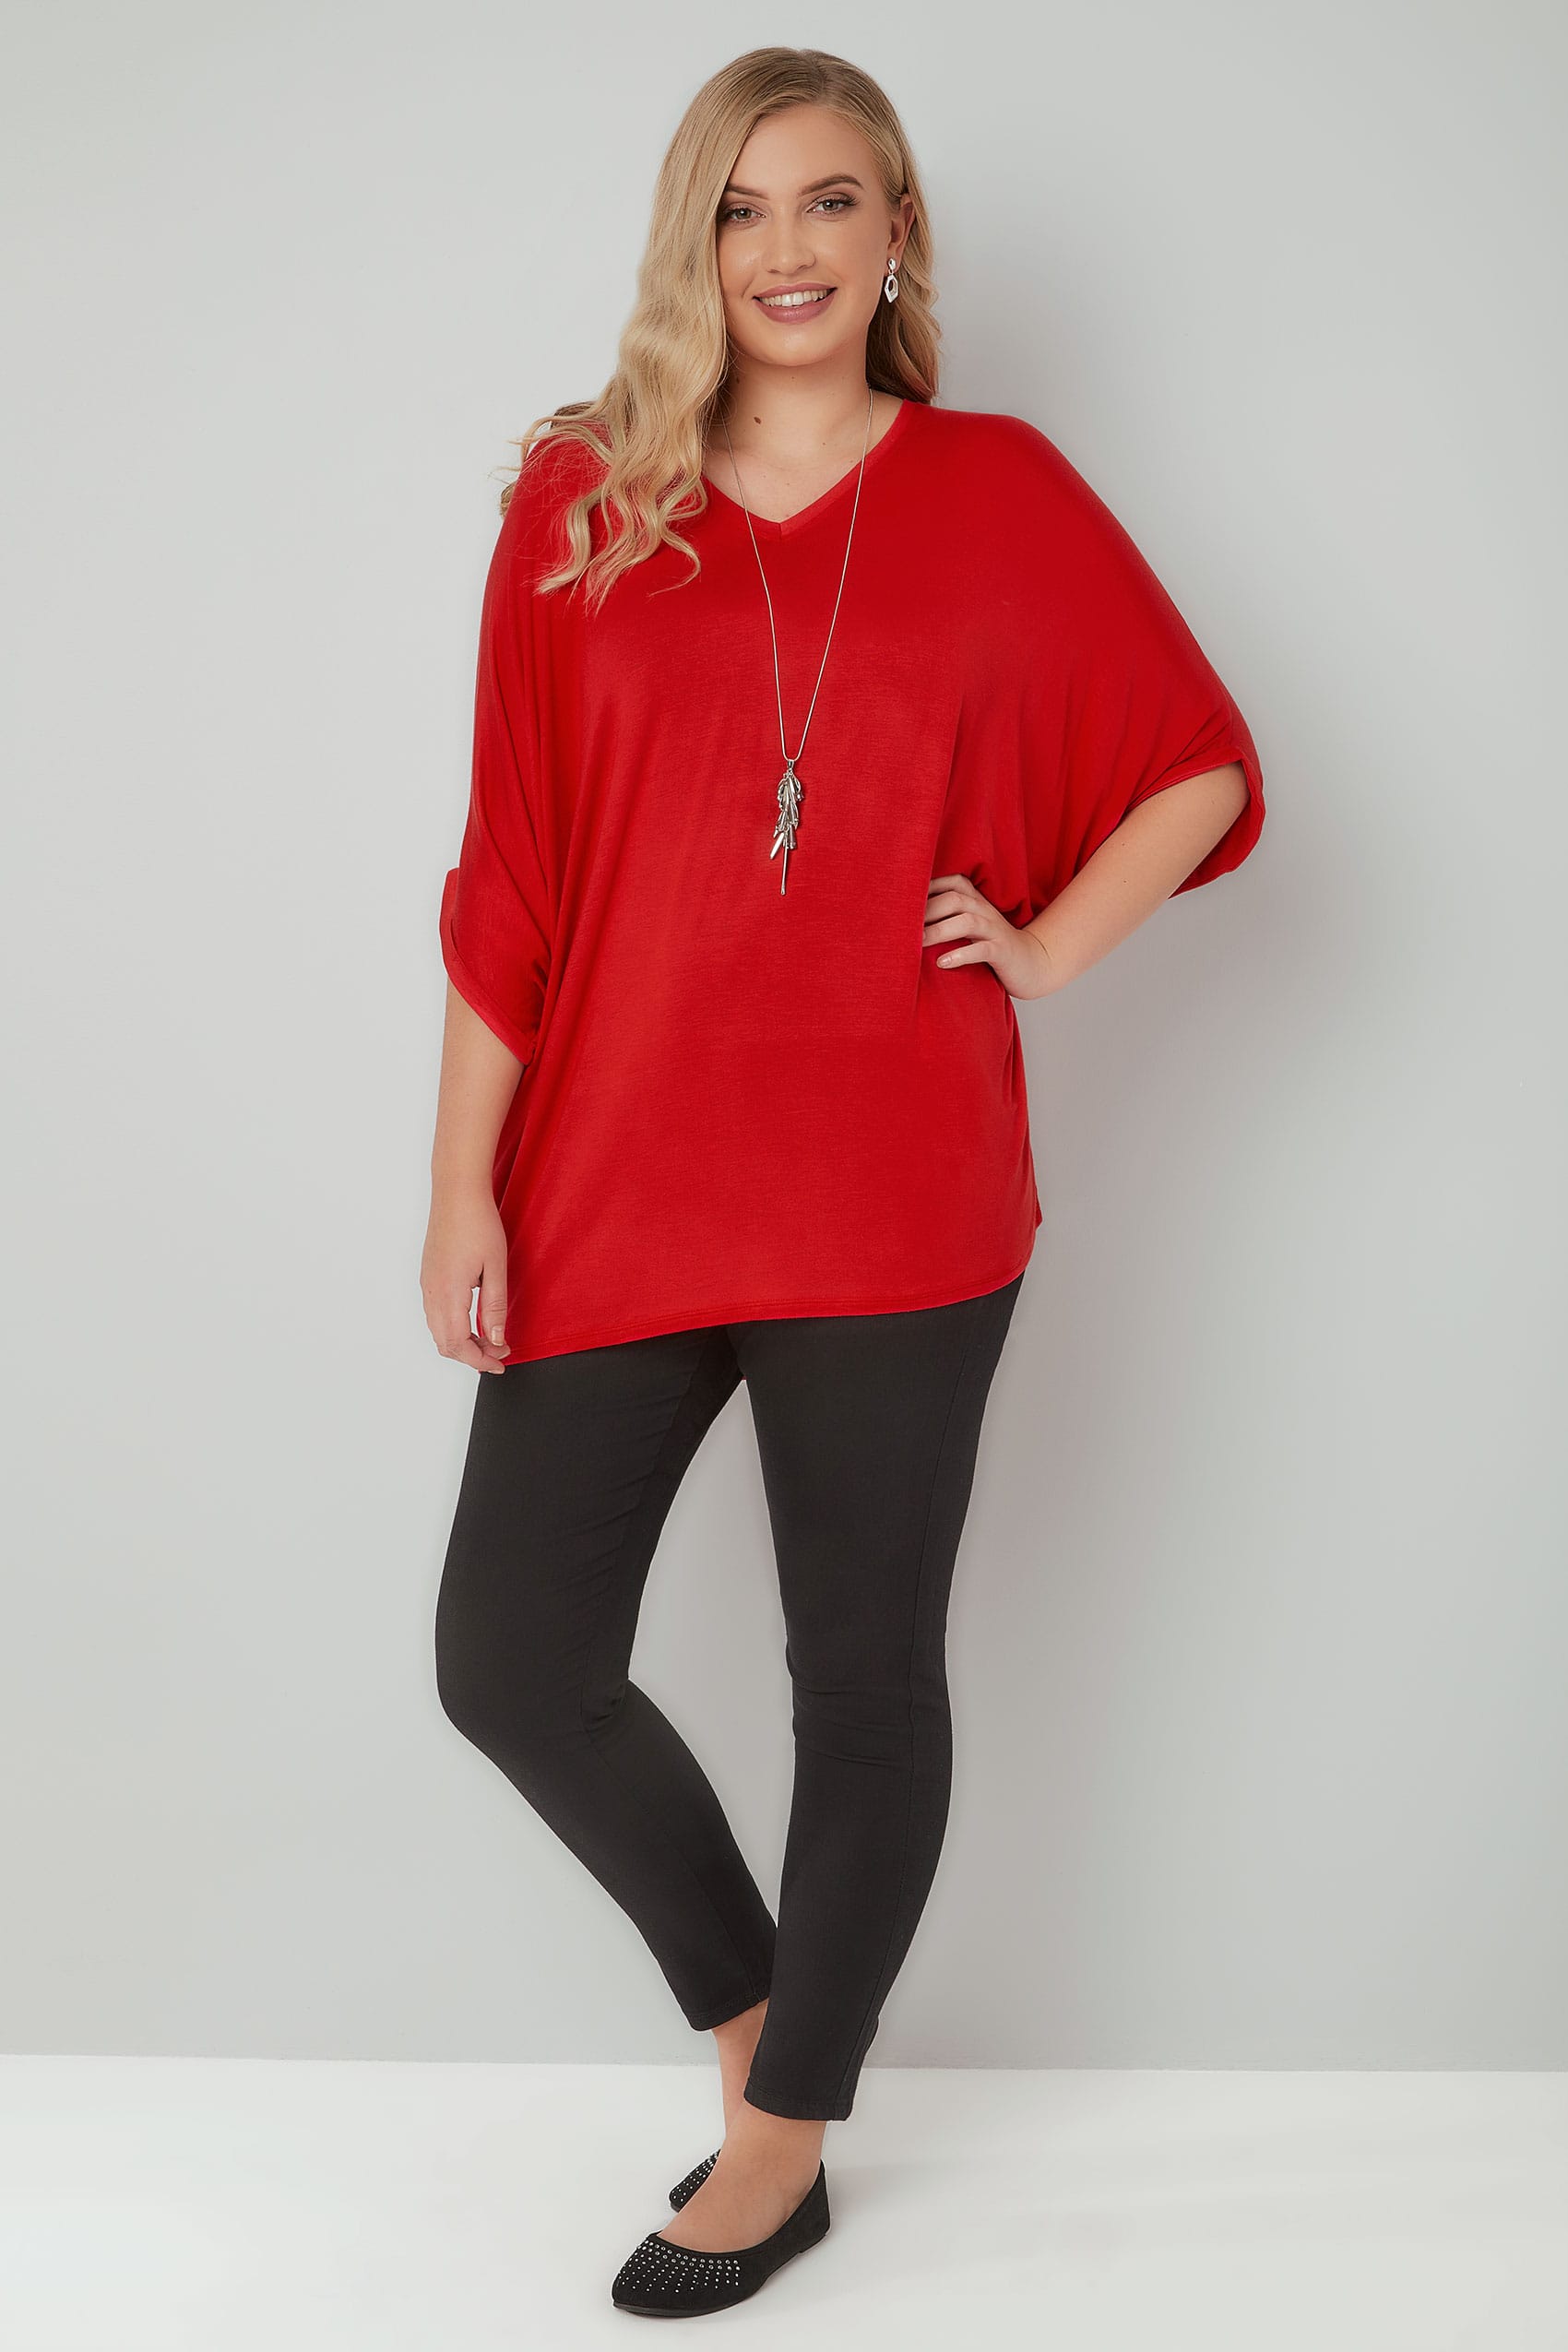 Red V-Neck Oversized Cape Style Jersey Top plus size 16 to 36